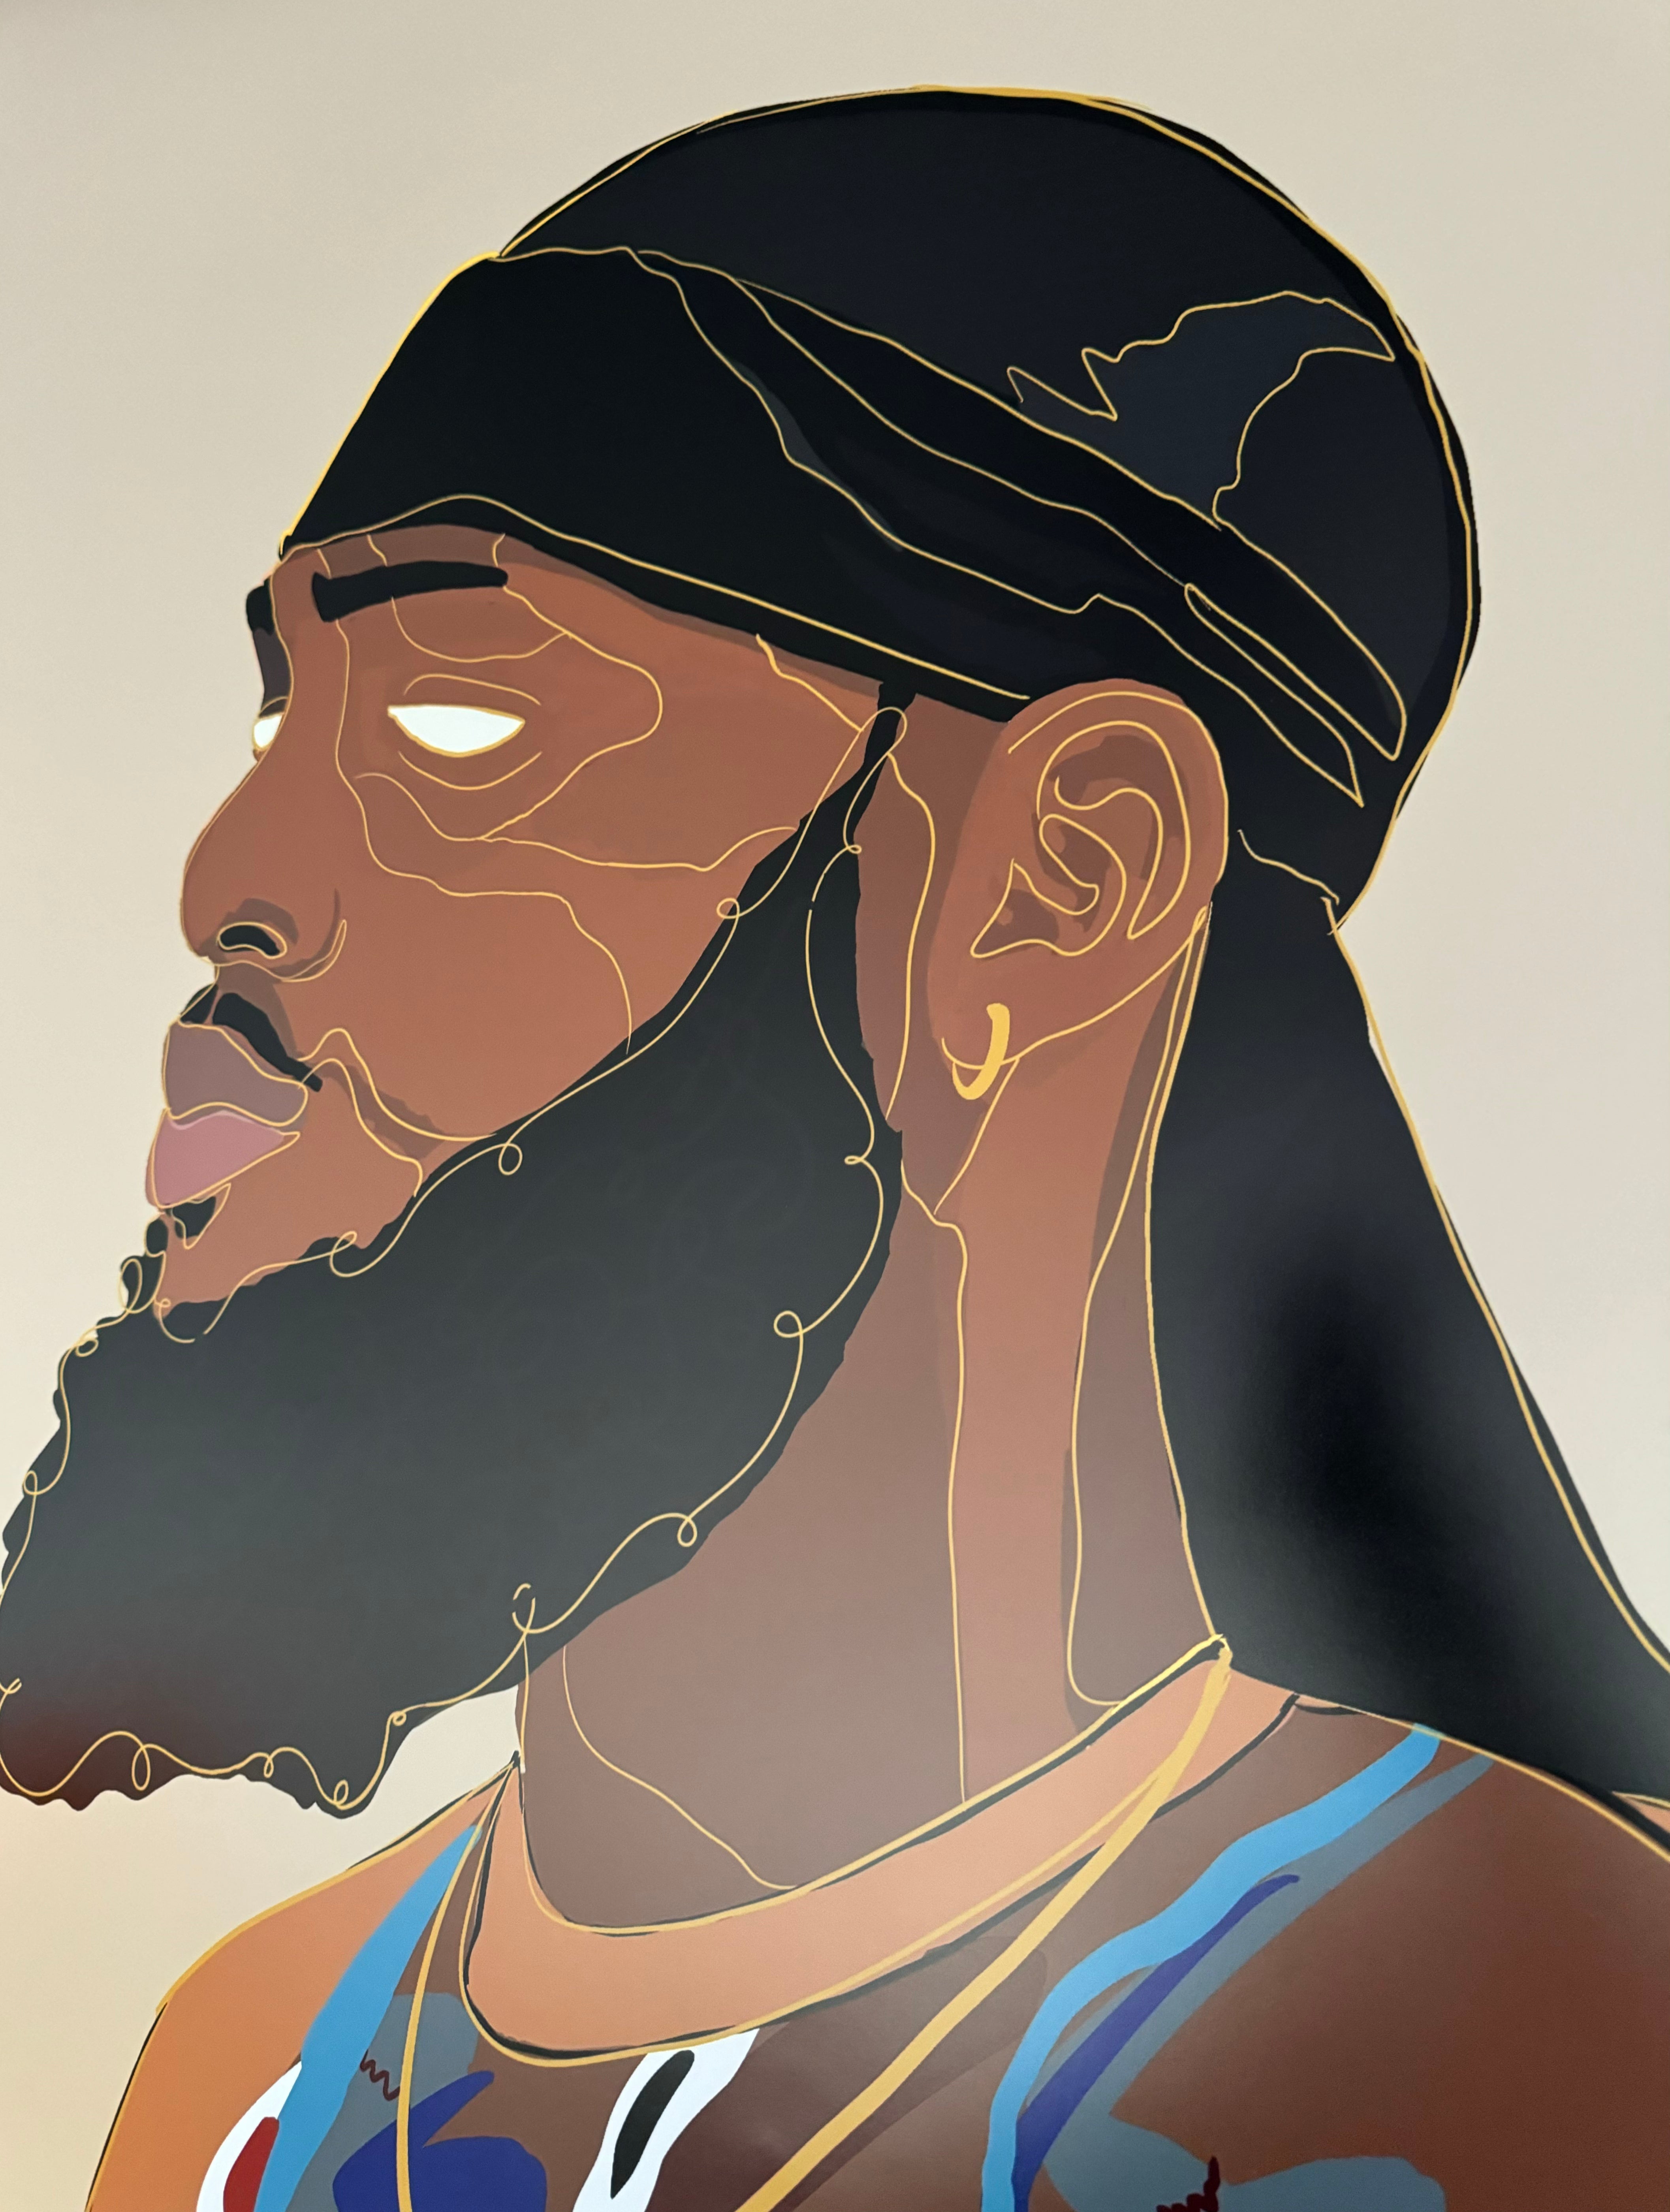 Beards and Durags